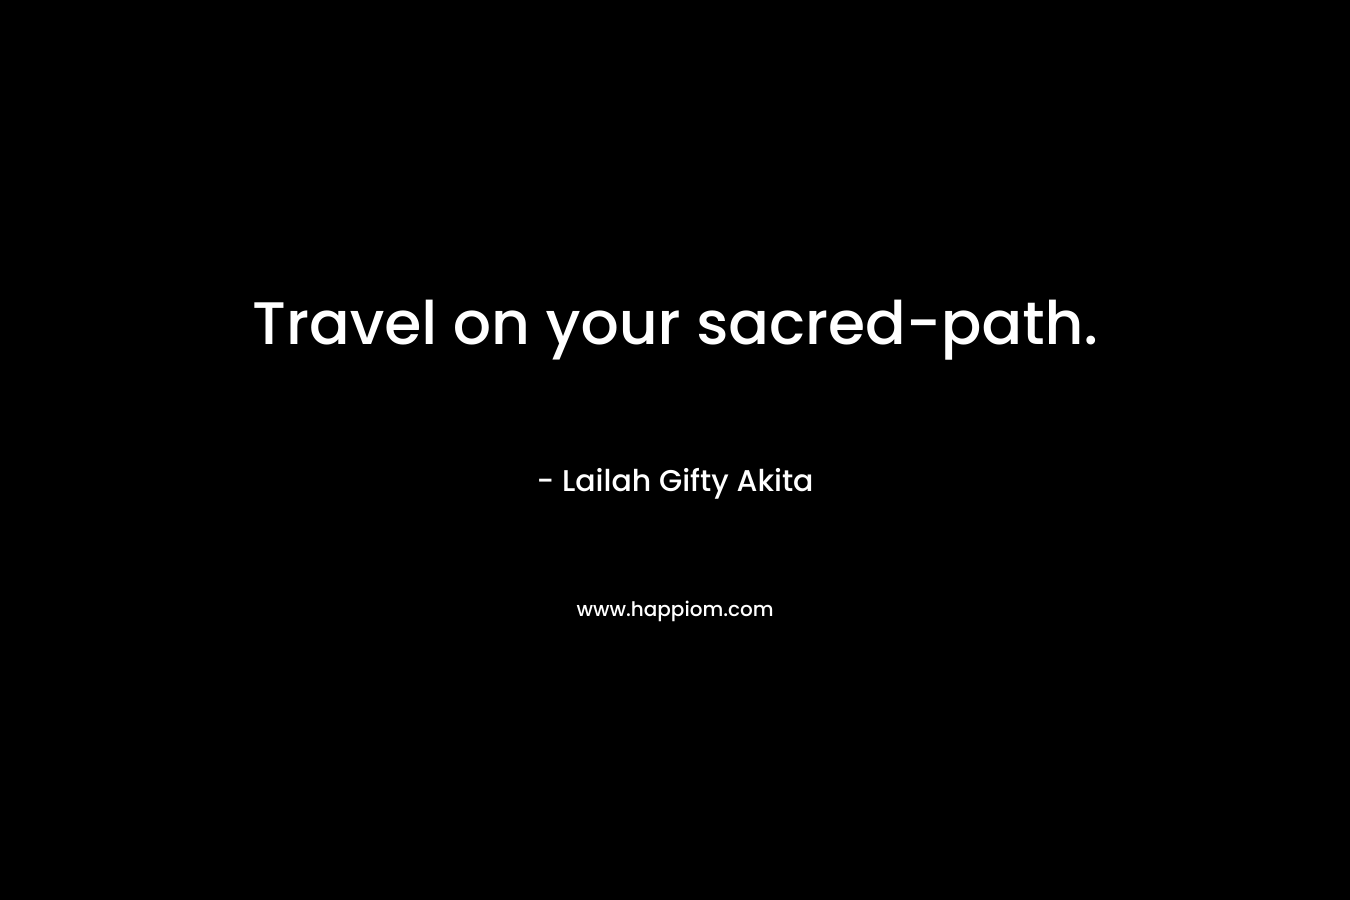 Travel on your sacred-path.